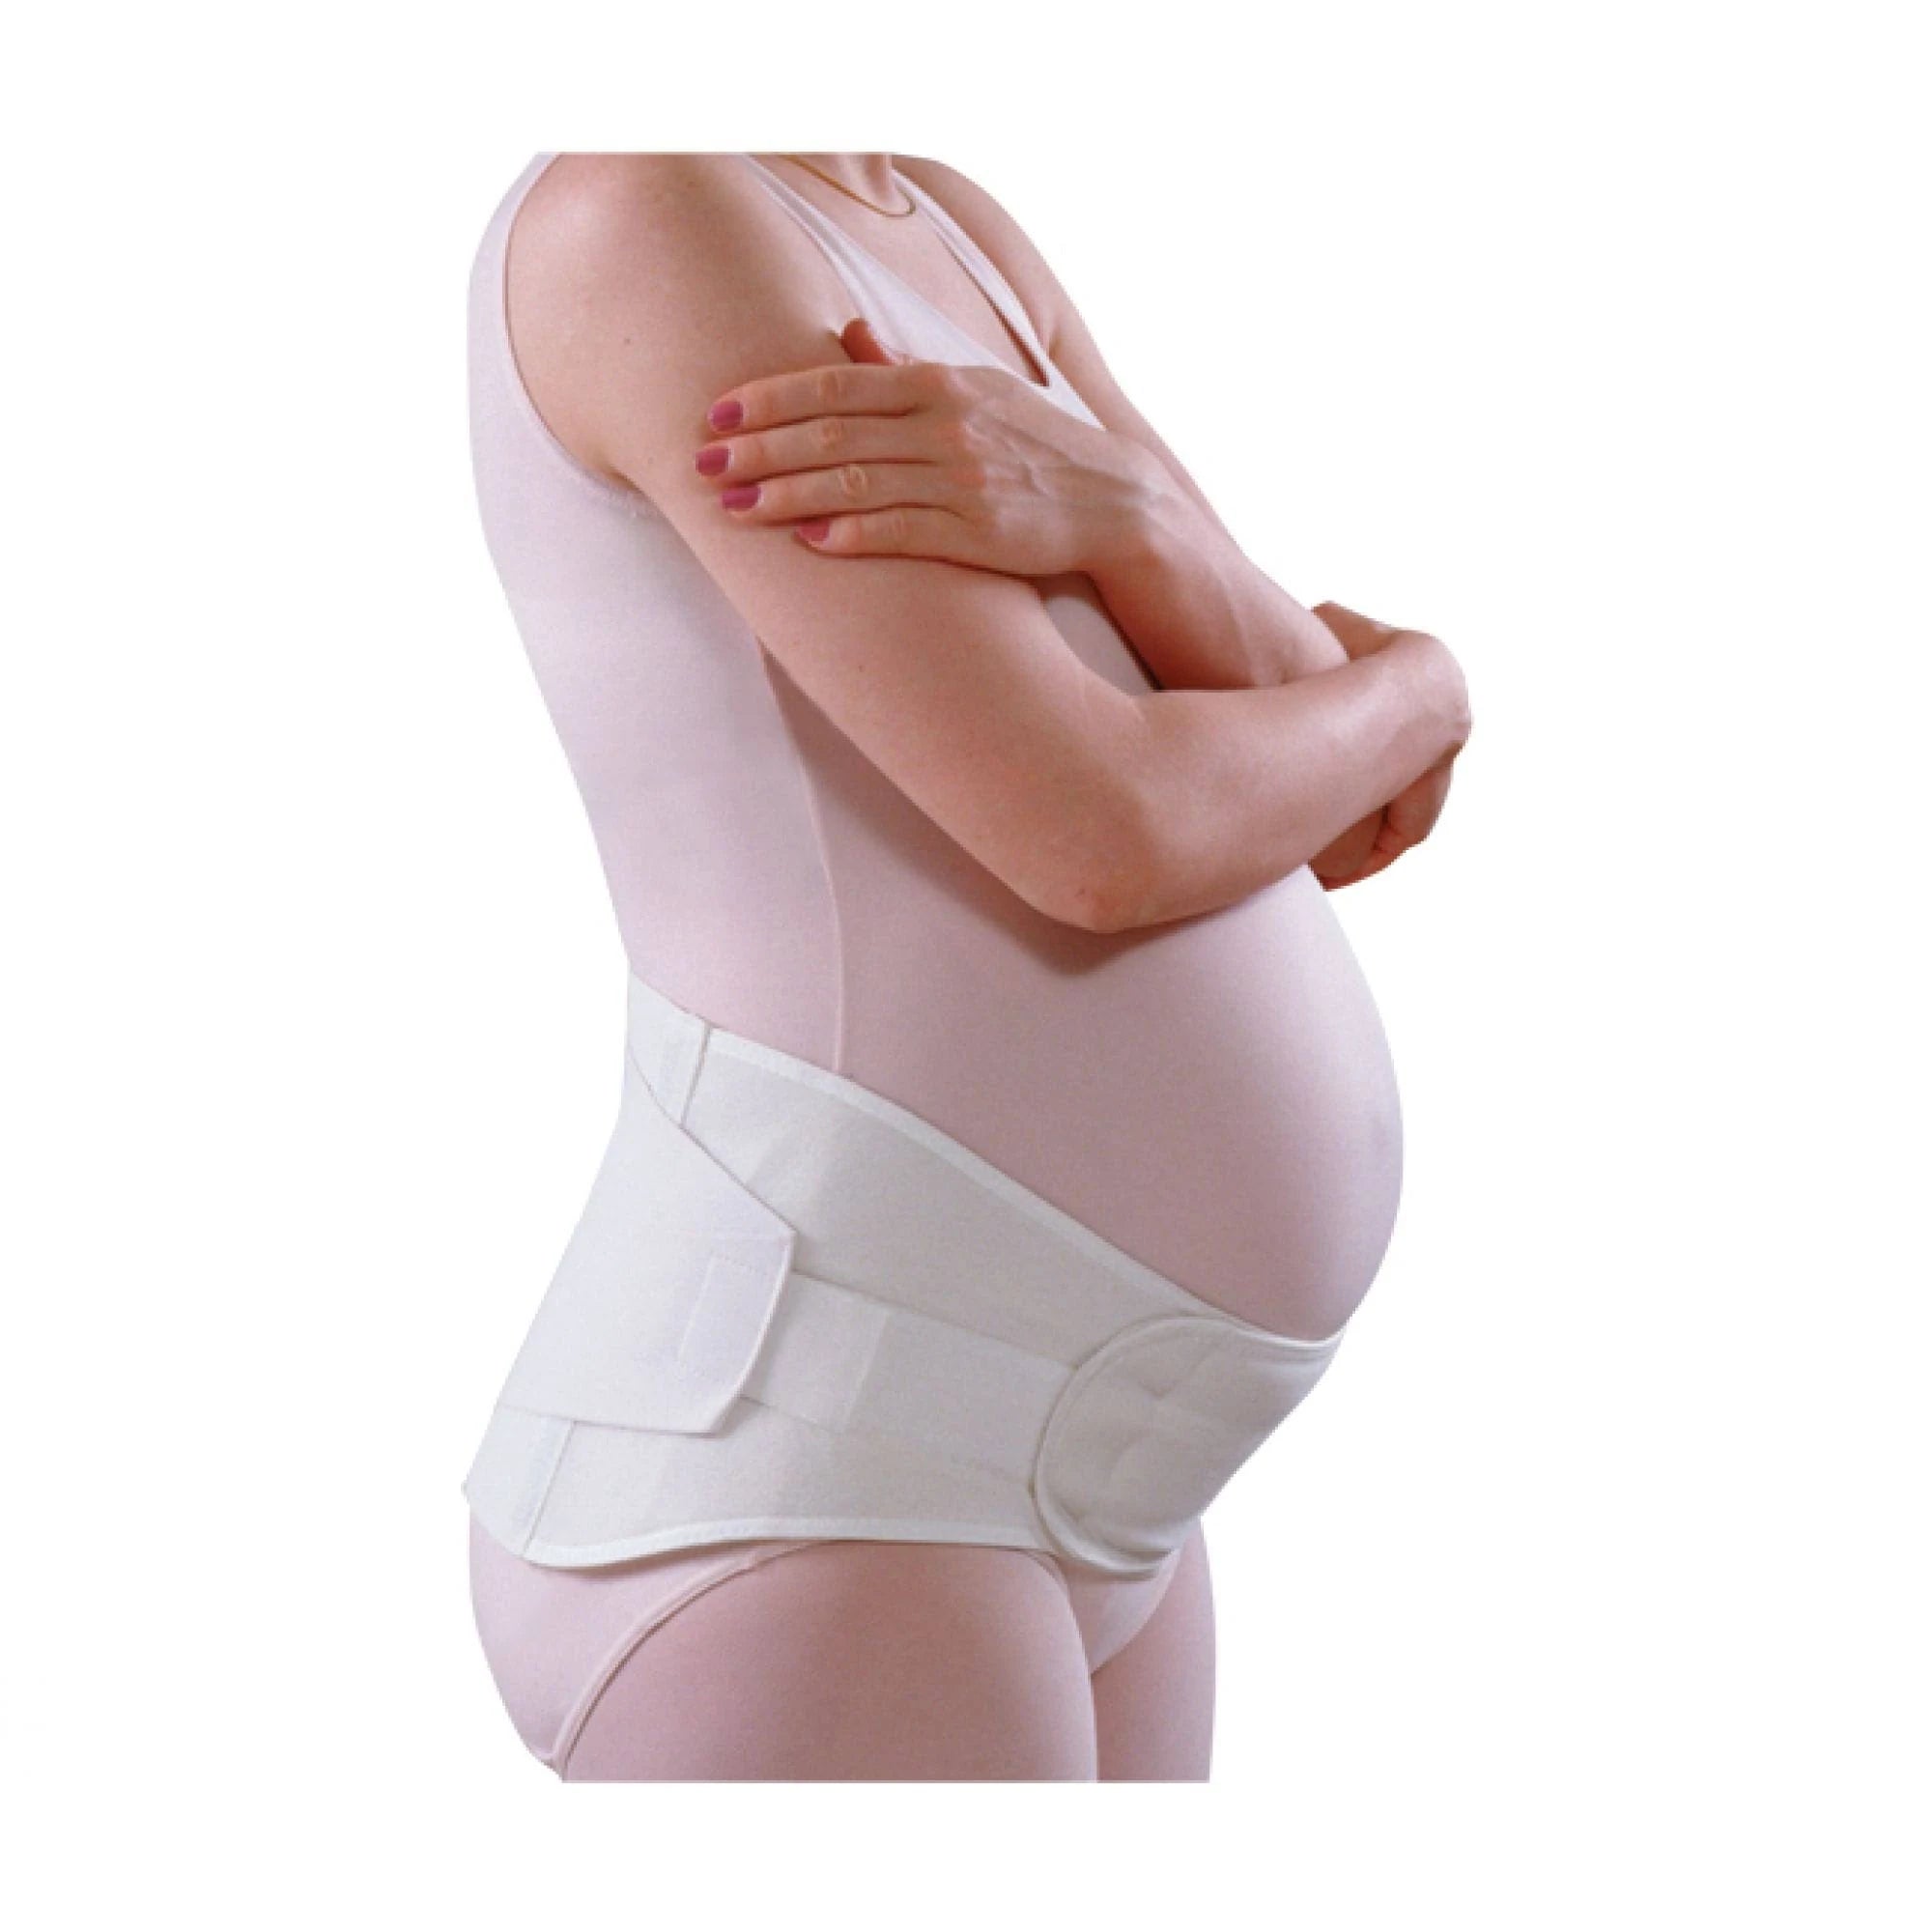 Mom-EZ Maternity Abdominal Support Belt – Special Addition